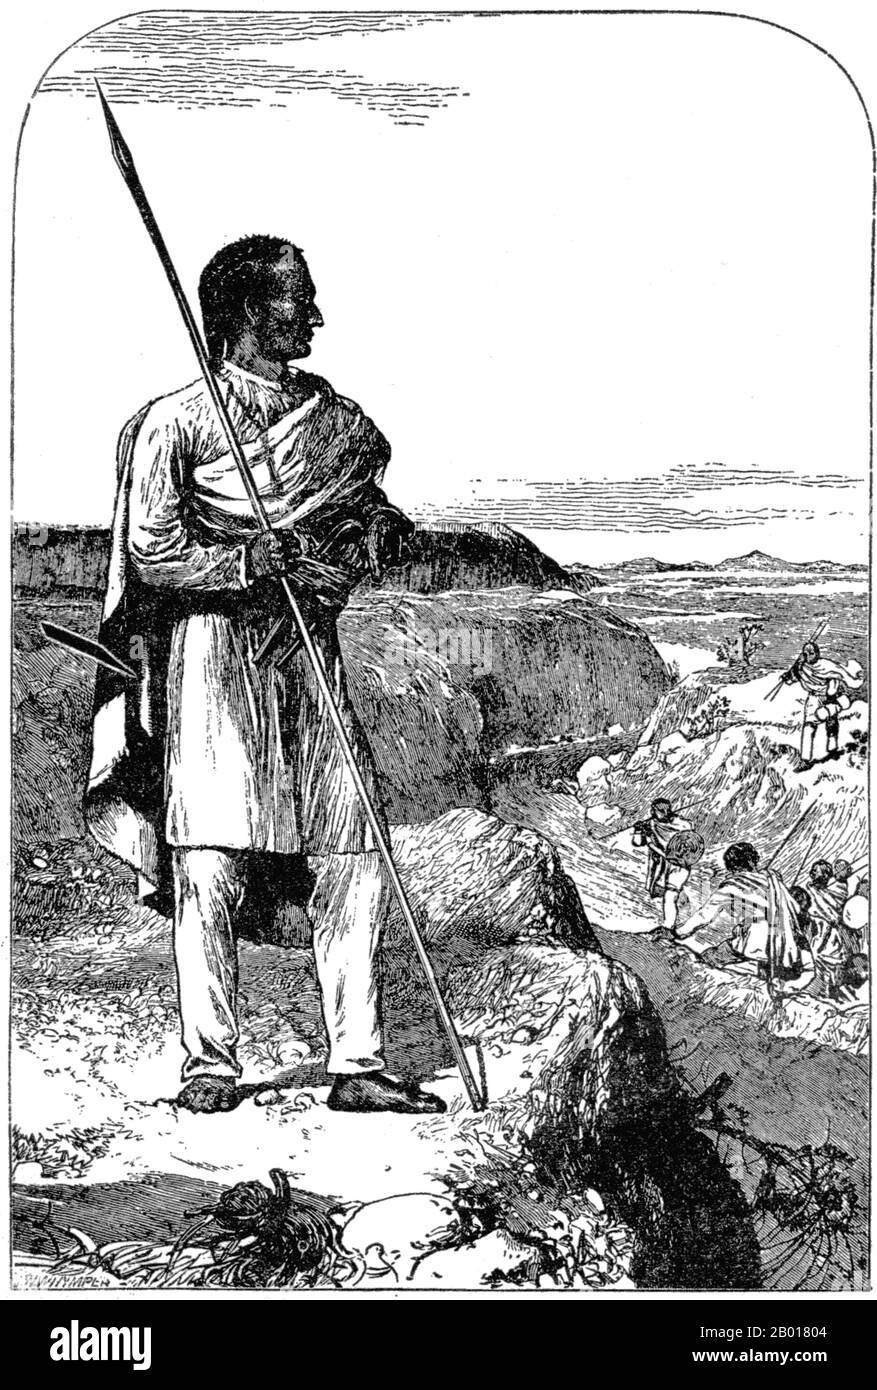 Ethiopia: Emperor Tewodros II (c. 1818 - 13 April 1868) overseeing the crossing of the Blue Nile. Illustration from H. Rassam's 'Narrative of British Mission to Theodore', 1869.  The British 1868 Expedition to Abyssinia was a punitive expedition carried out by armed forces of the British Empire against the Ethiopian Empire. Emperor Tewodros II of Ethiopia, also known as 'Theodore', imprisoned several missionaries and two representatives of the British government. The punitive expedition launched from Bombay in upwards of 280 ships, with over 13,000 British and Indian soldiers. Stock Photo